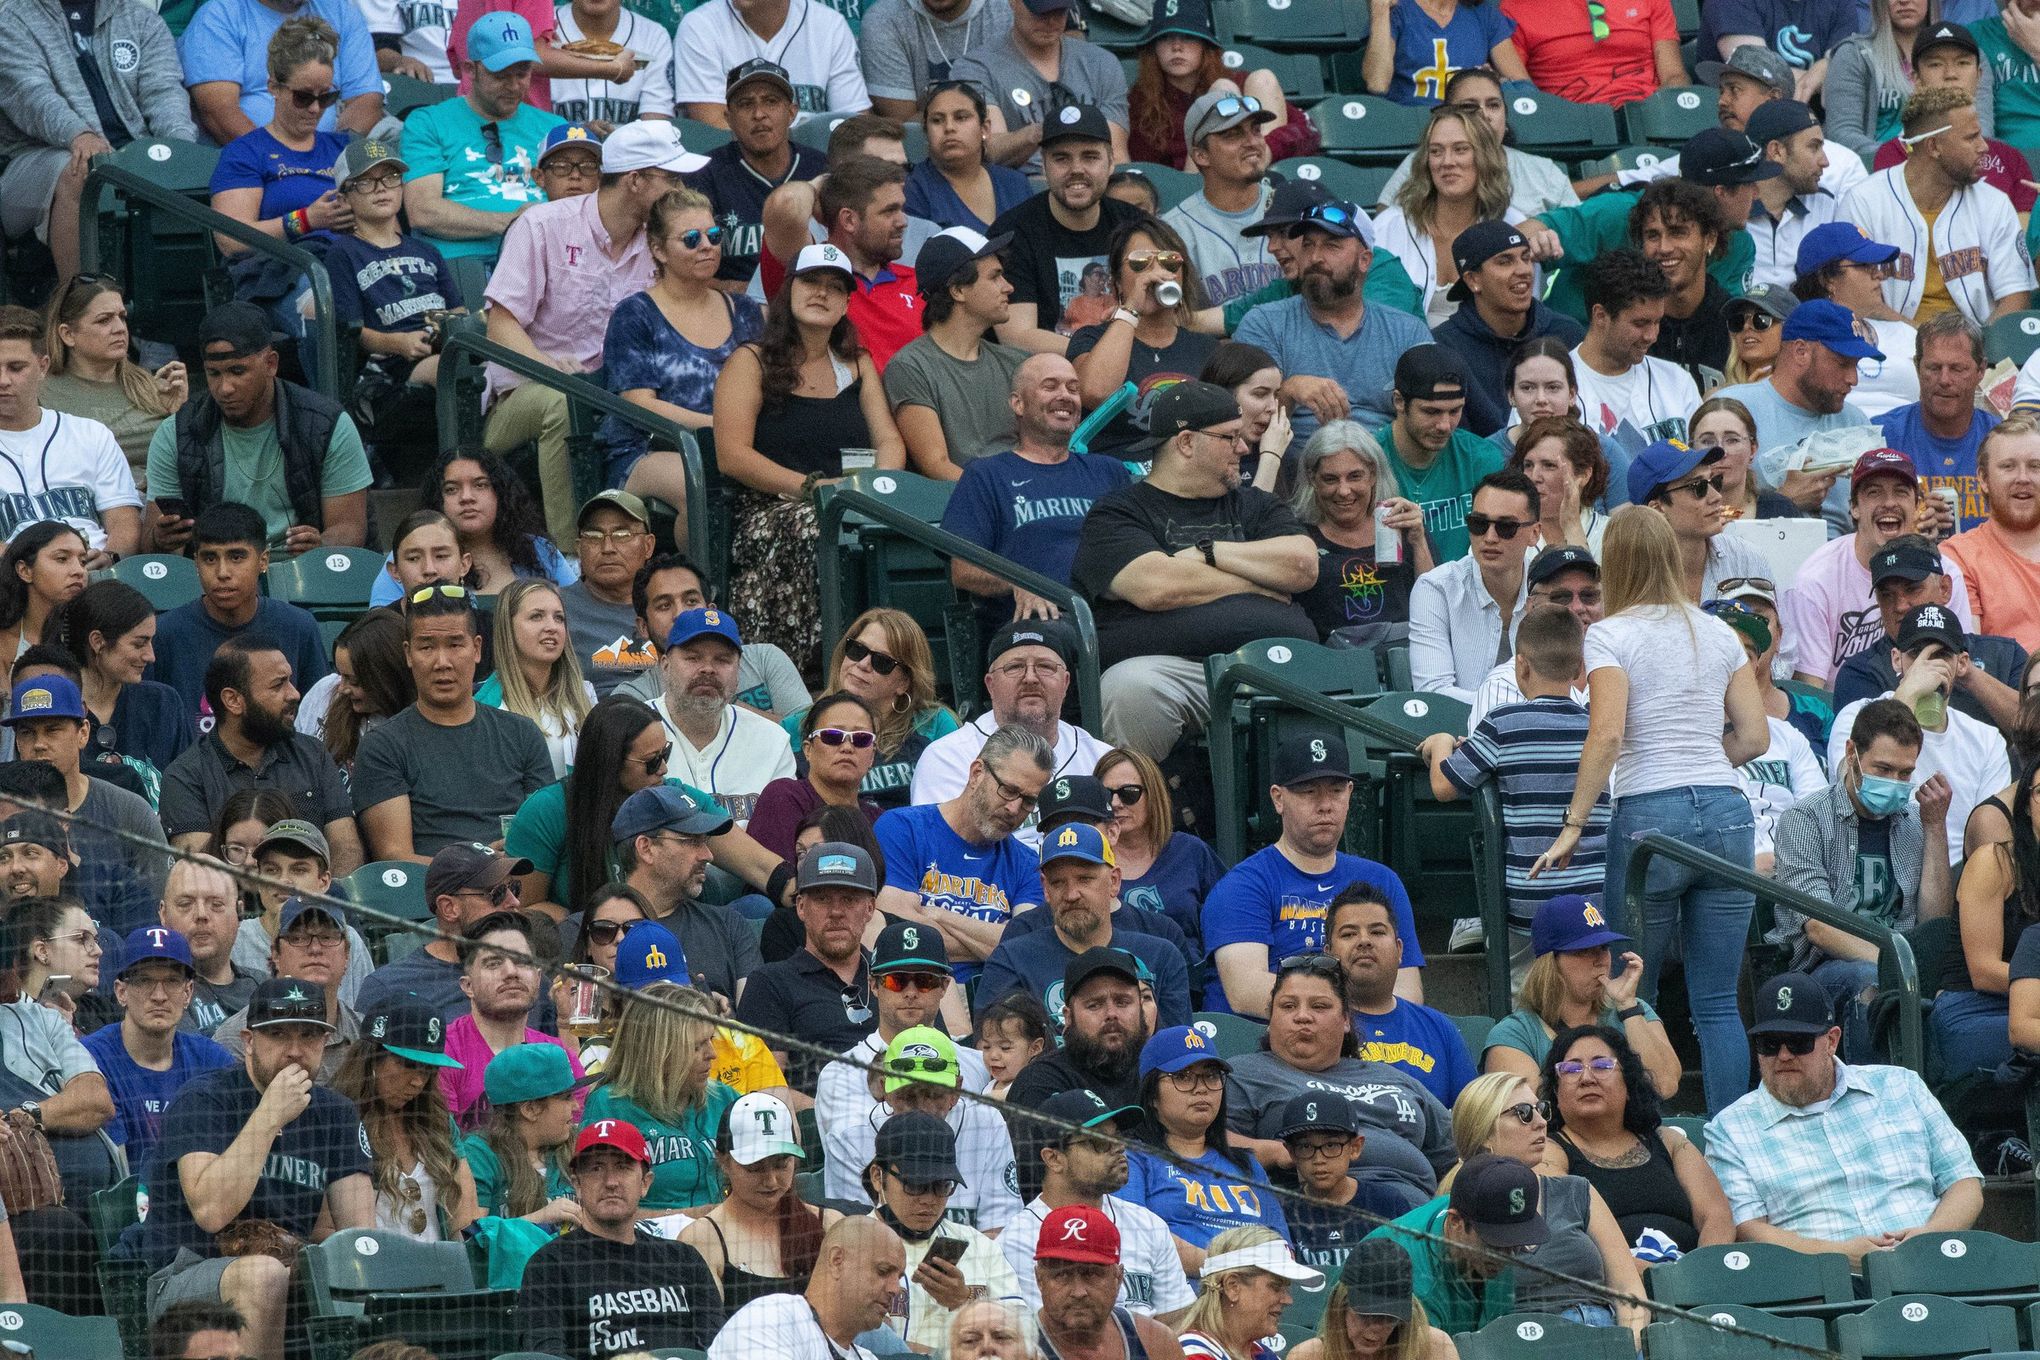 mariners retro jersey giveaway 2022